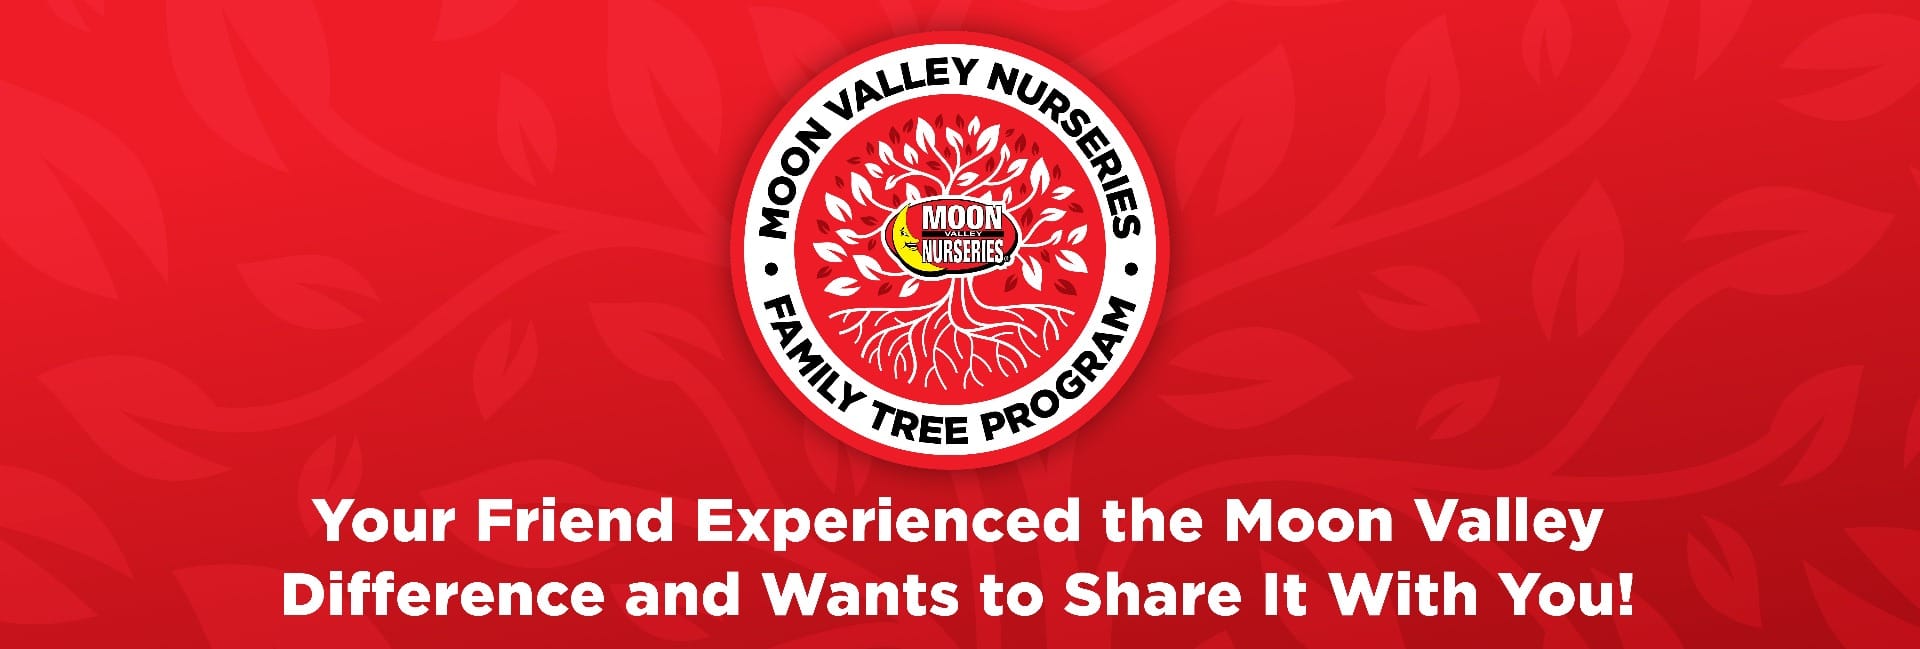 Your friend experienced the Moon Valley difference and wants to share it with you!